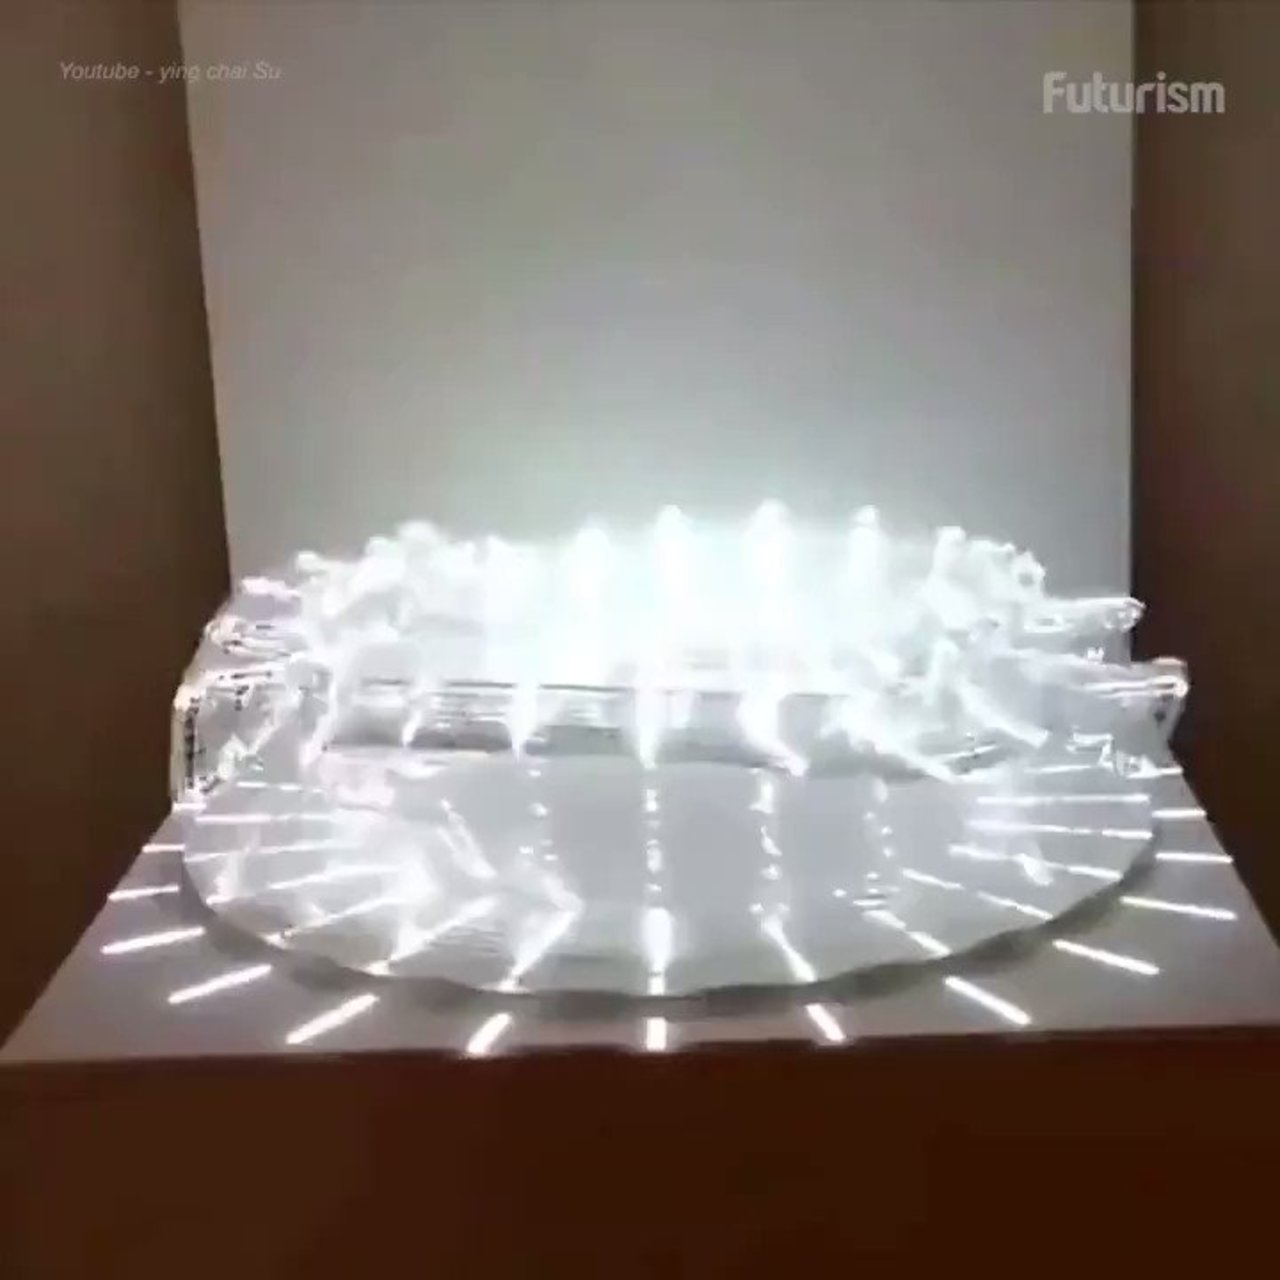 This 3d printed zeotrode creates the illusion of 3d motion by @futurism #Innovation #Digital #Tech #DataScience #AI #IoT #Finserv #Fintech Cc: @enricomolinari https://t.co/wg2Py5GYPj